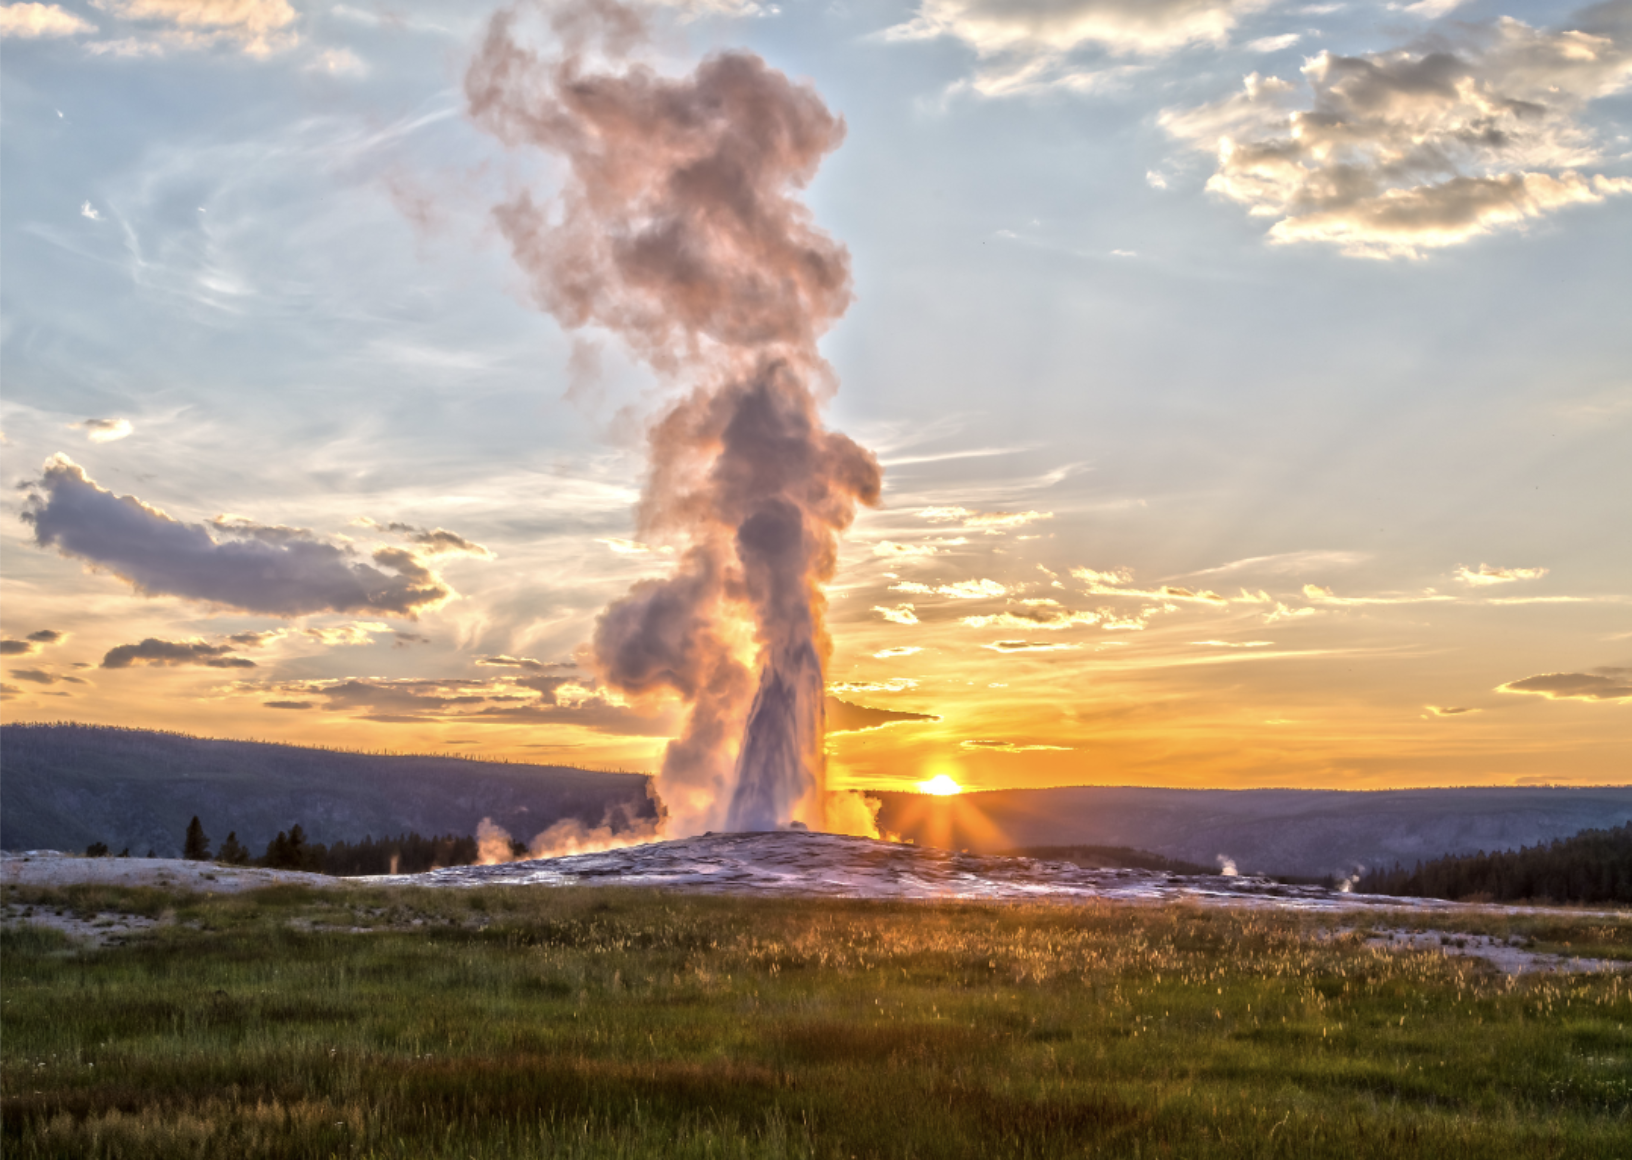 Old Faithful erupting in Yellowstone National Park at sunset.